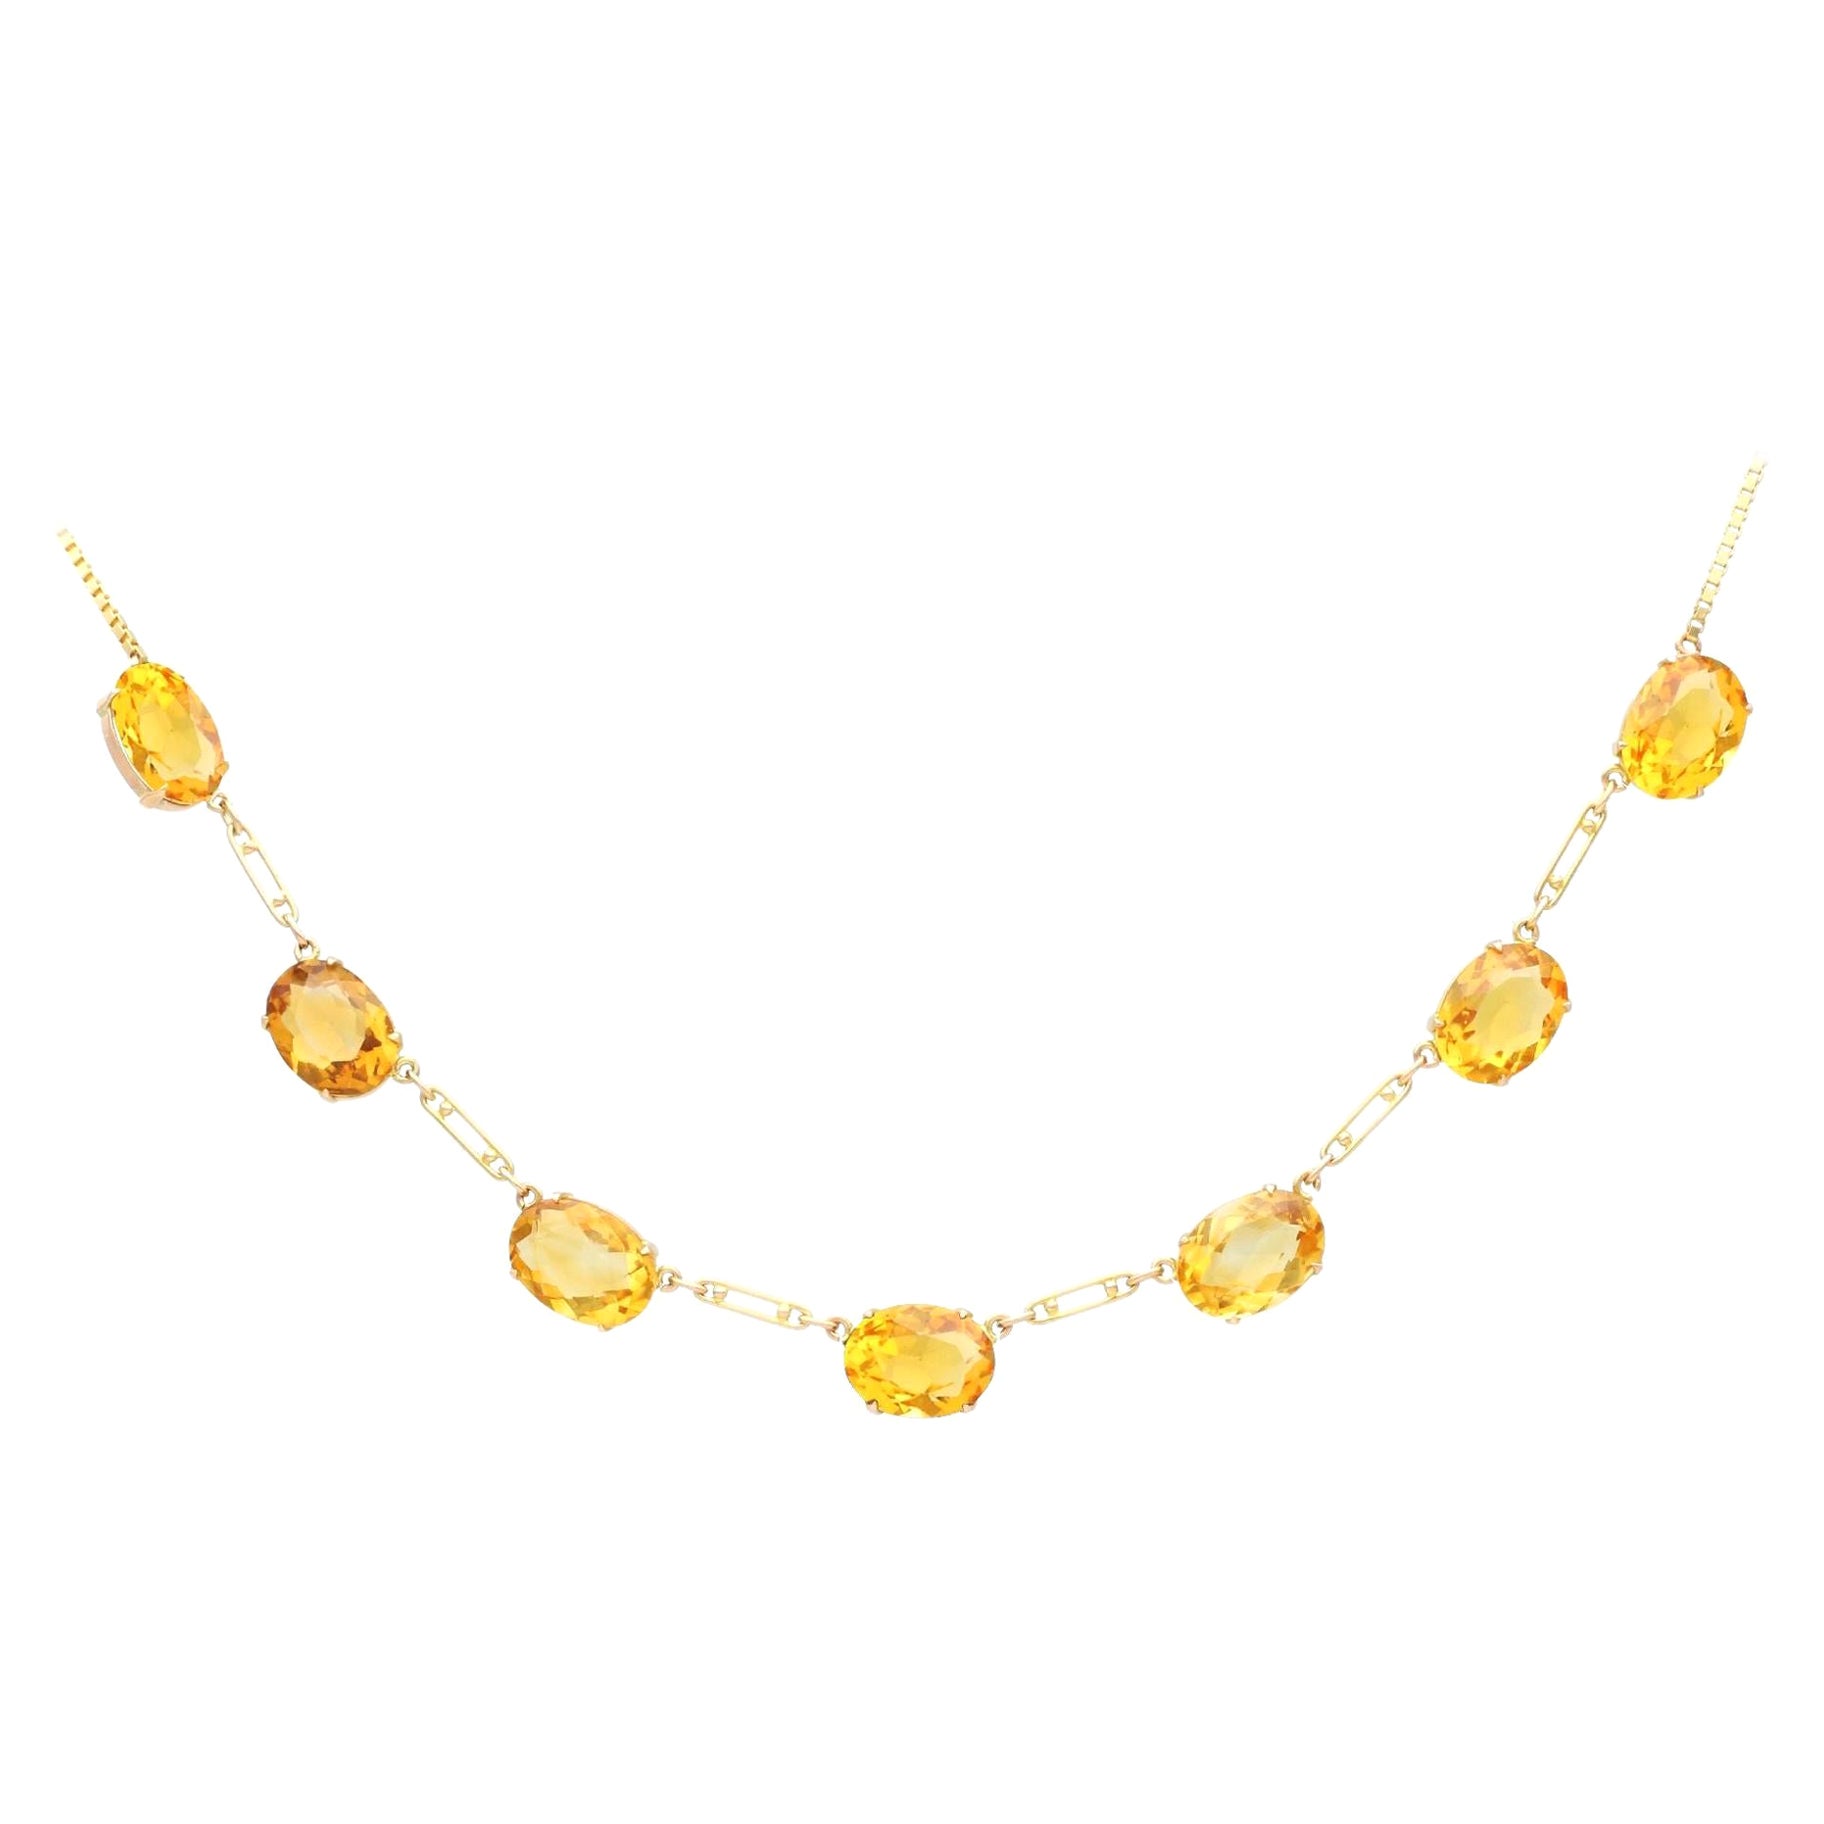 Vintage 24.57ct Citrine and 9ct Yellow Gold Necklace